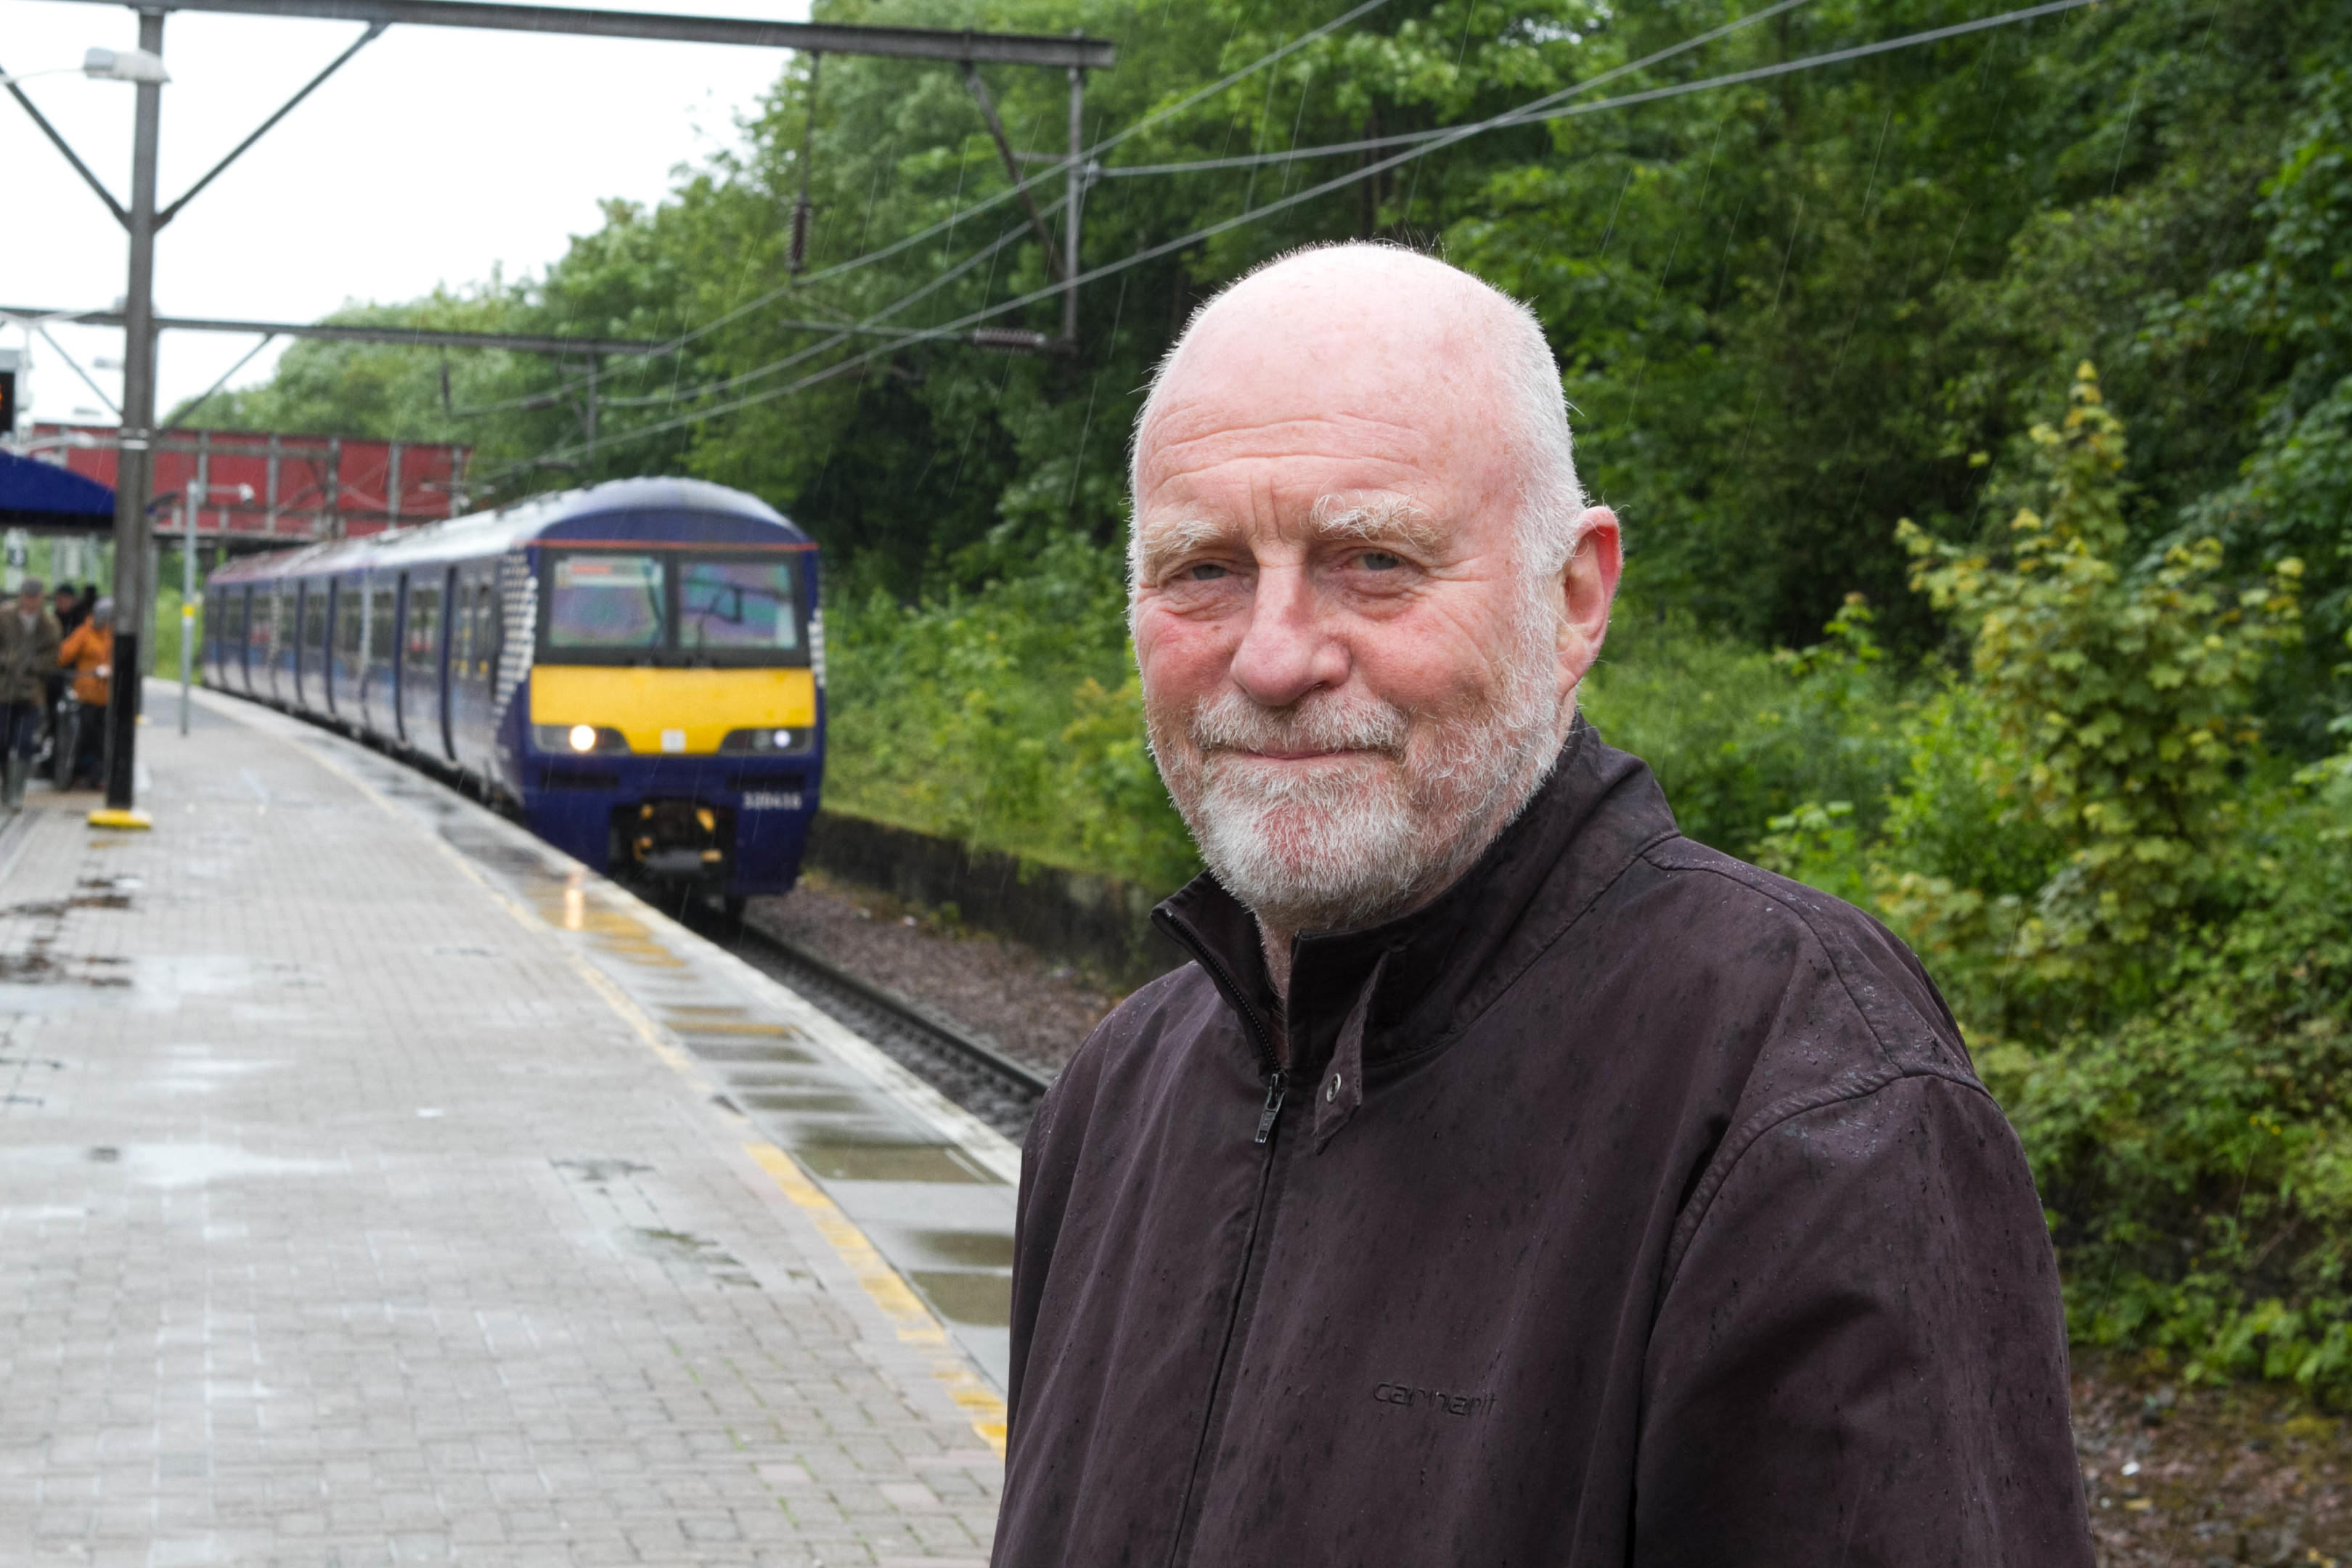 Stuart Campbell has written a book on his train journies and people he has met along the way (Chris Austin / DC Thomson)